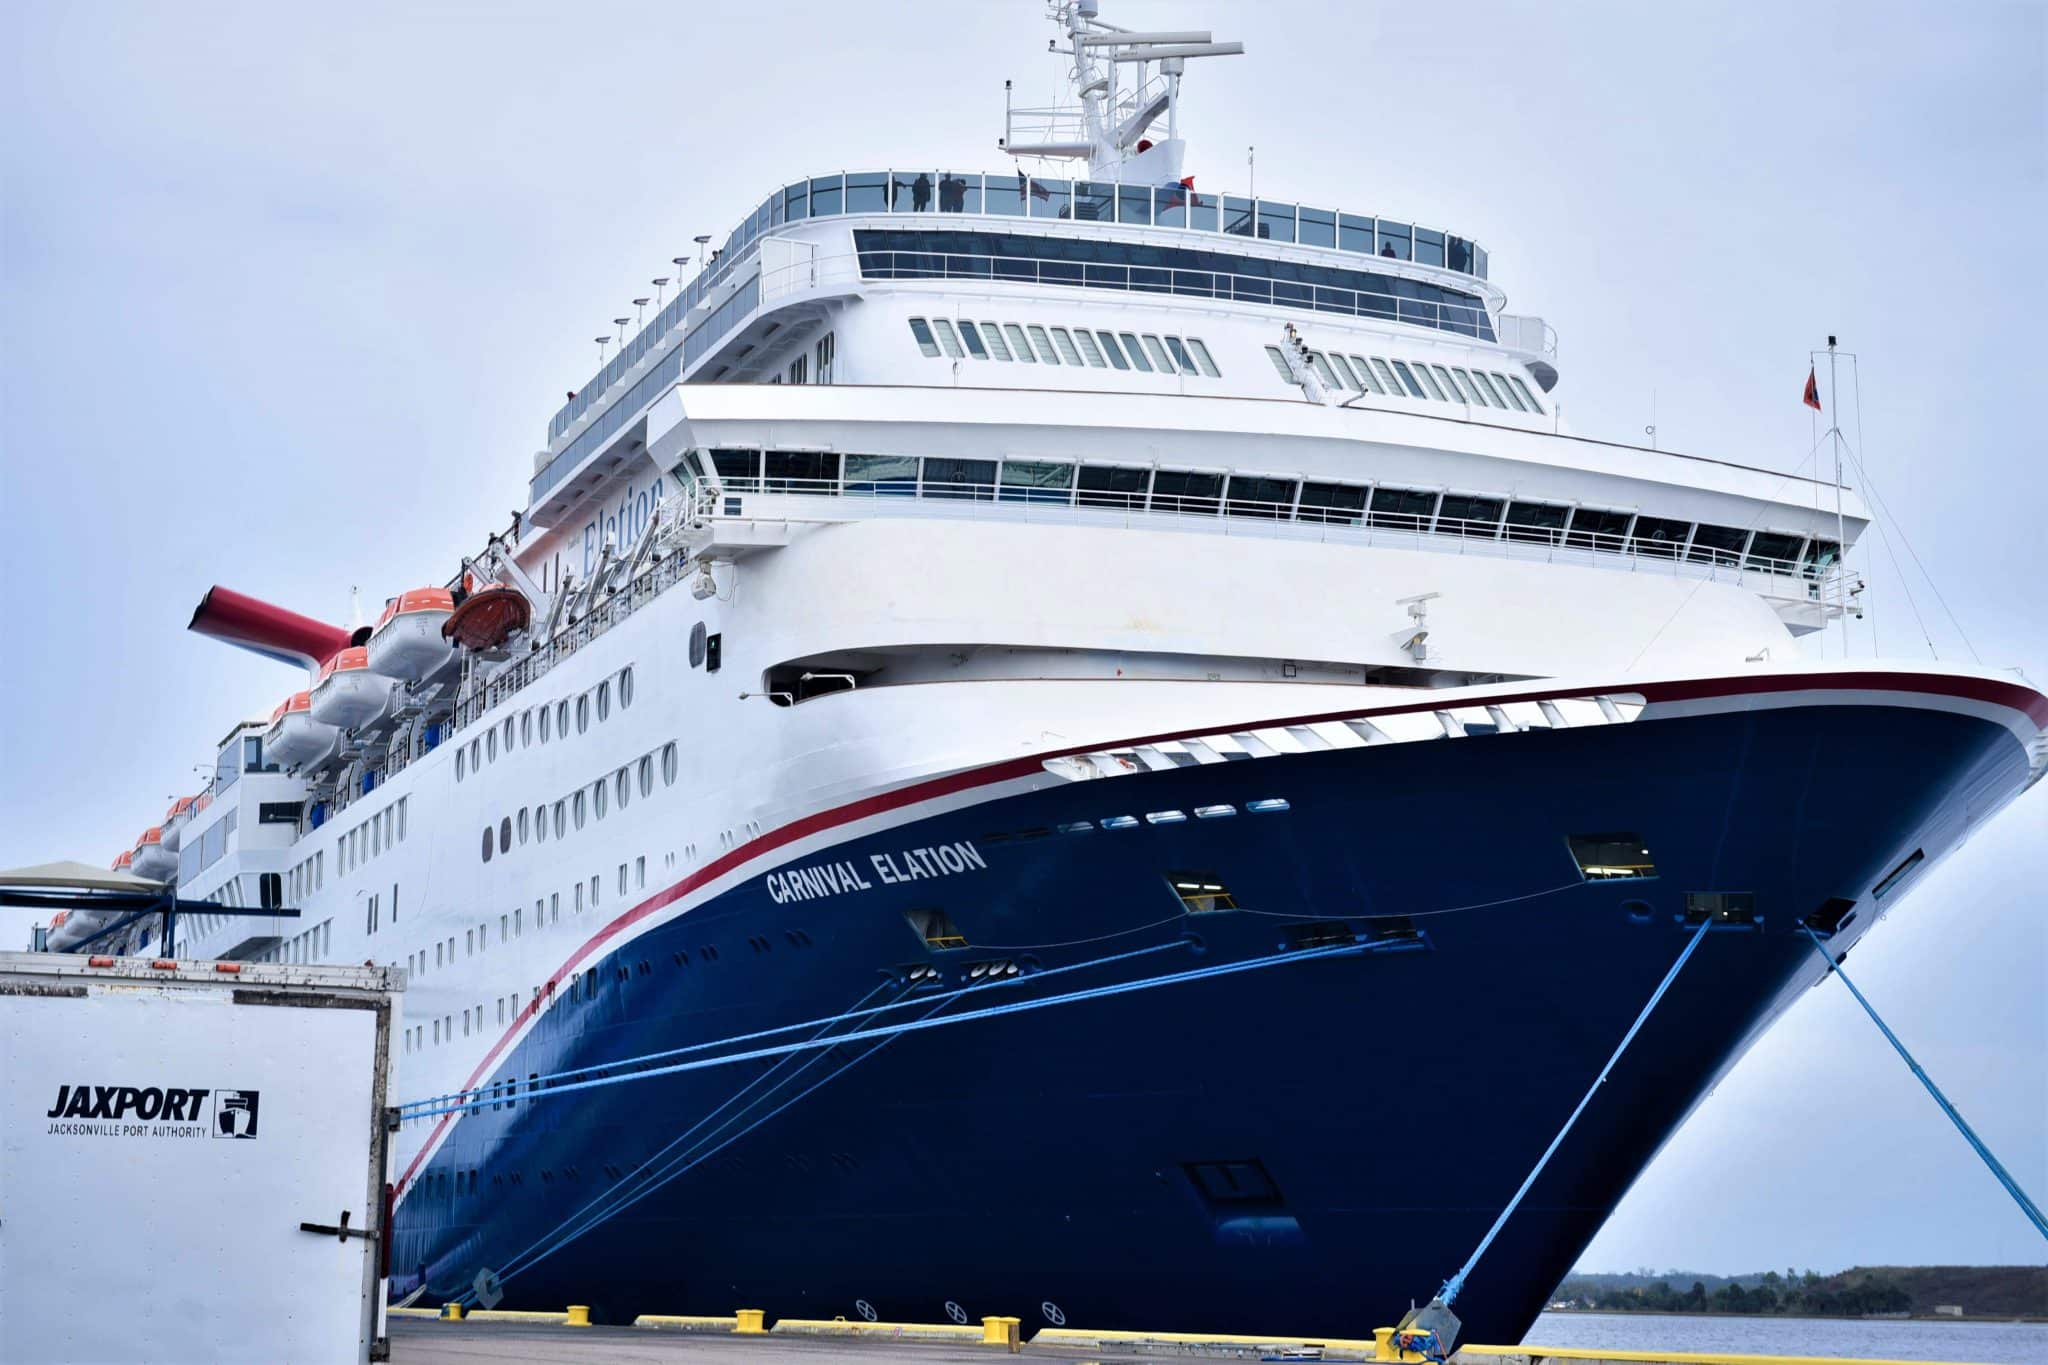 Carnival Cruise Ship Returns to Service With New Upgrades and Livery